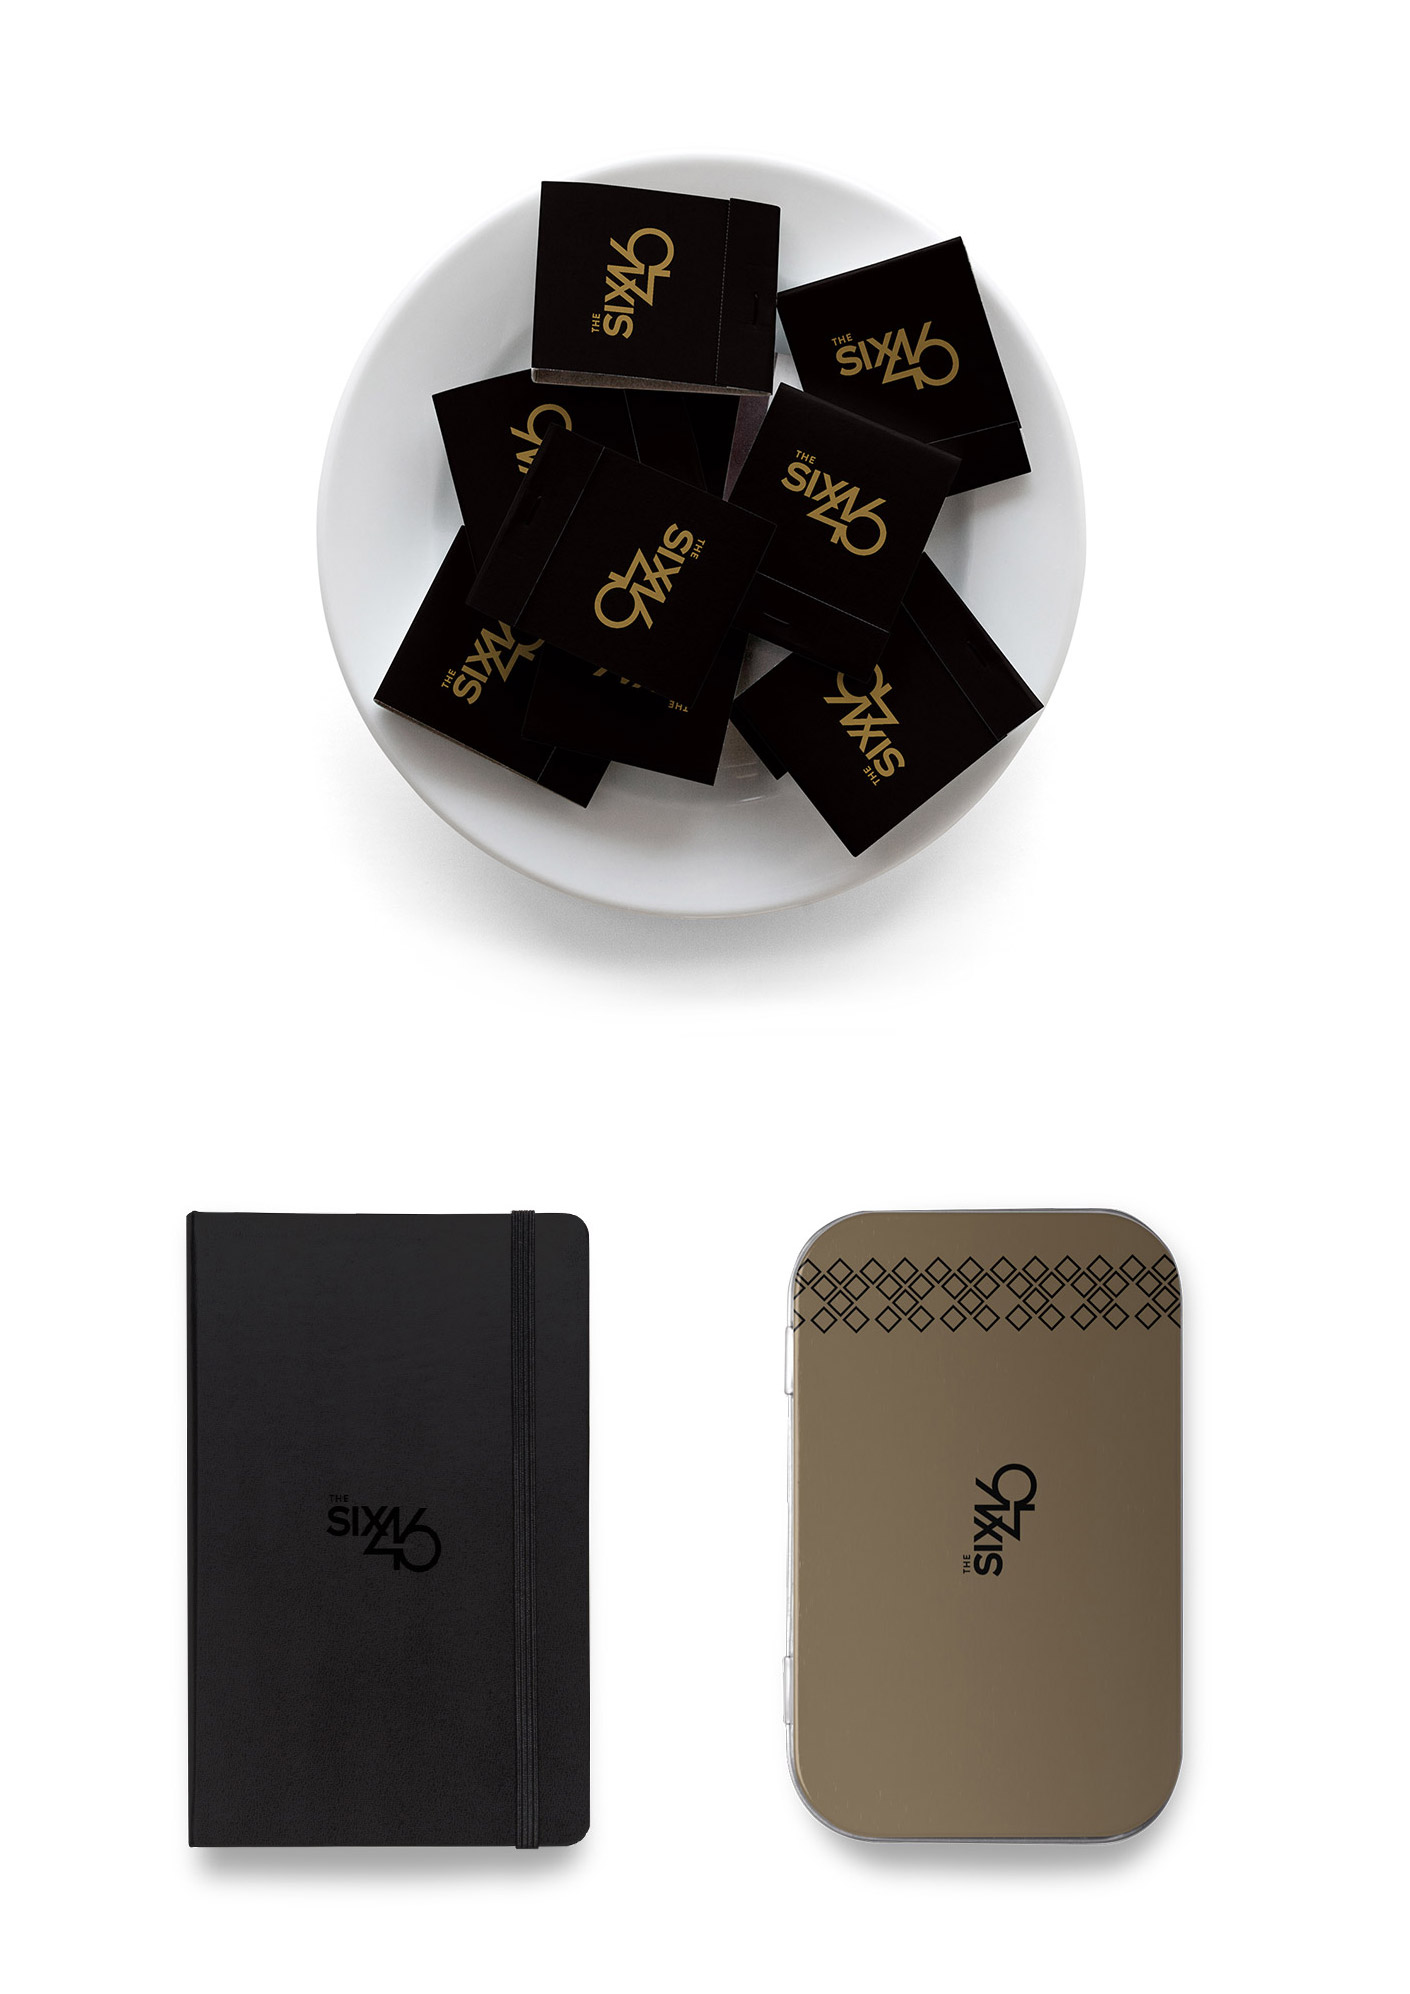 Matches in a bowl, a black notebooks, and a tablet cover with the Six46 logo.